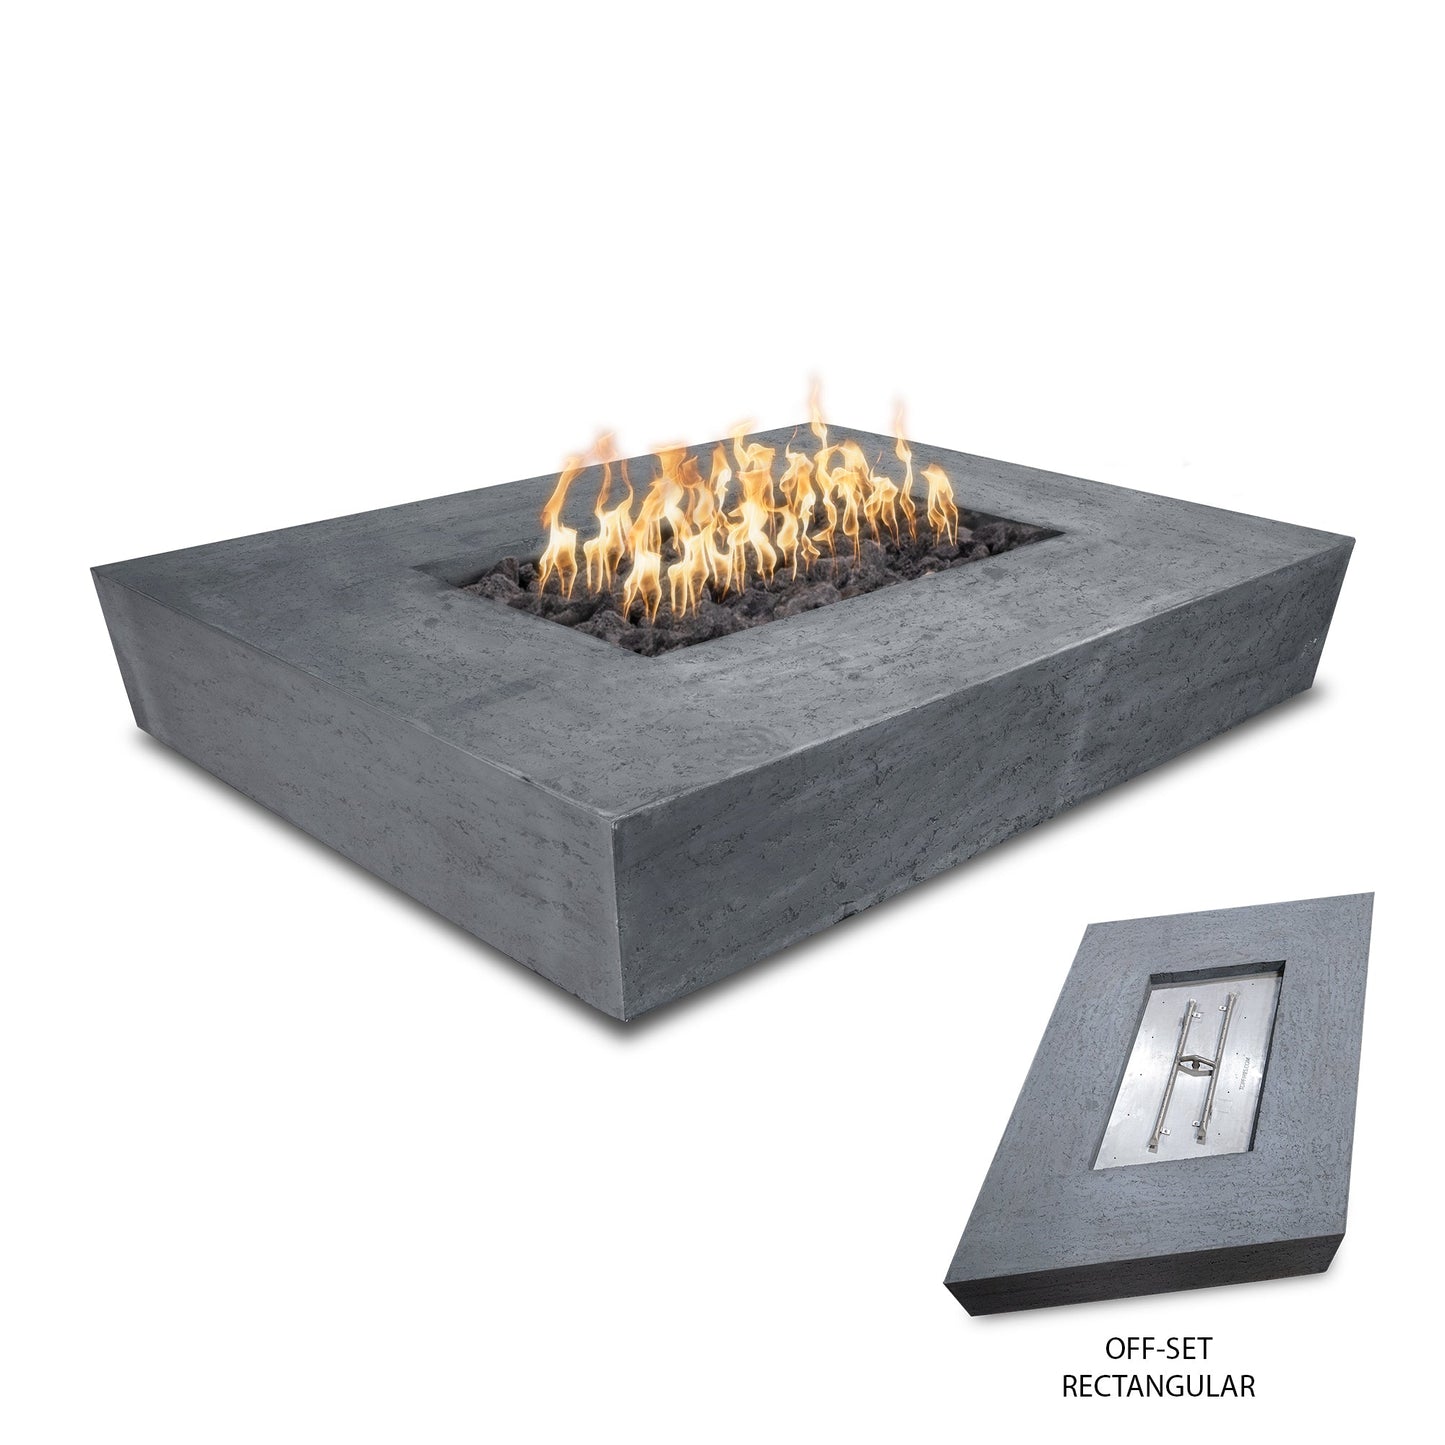 The Outdoor Plus Rectangular Heiko 58" Rustic Moss Stone GFRC Concrete Natural Gas Fire Pit with Match Lit Ignition